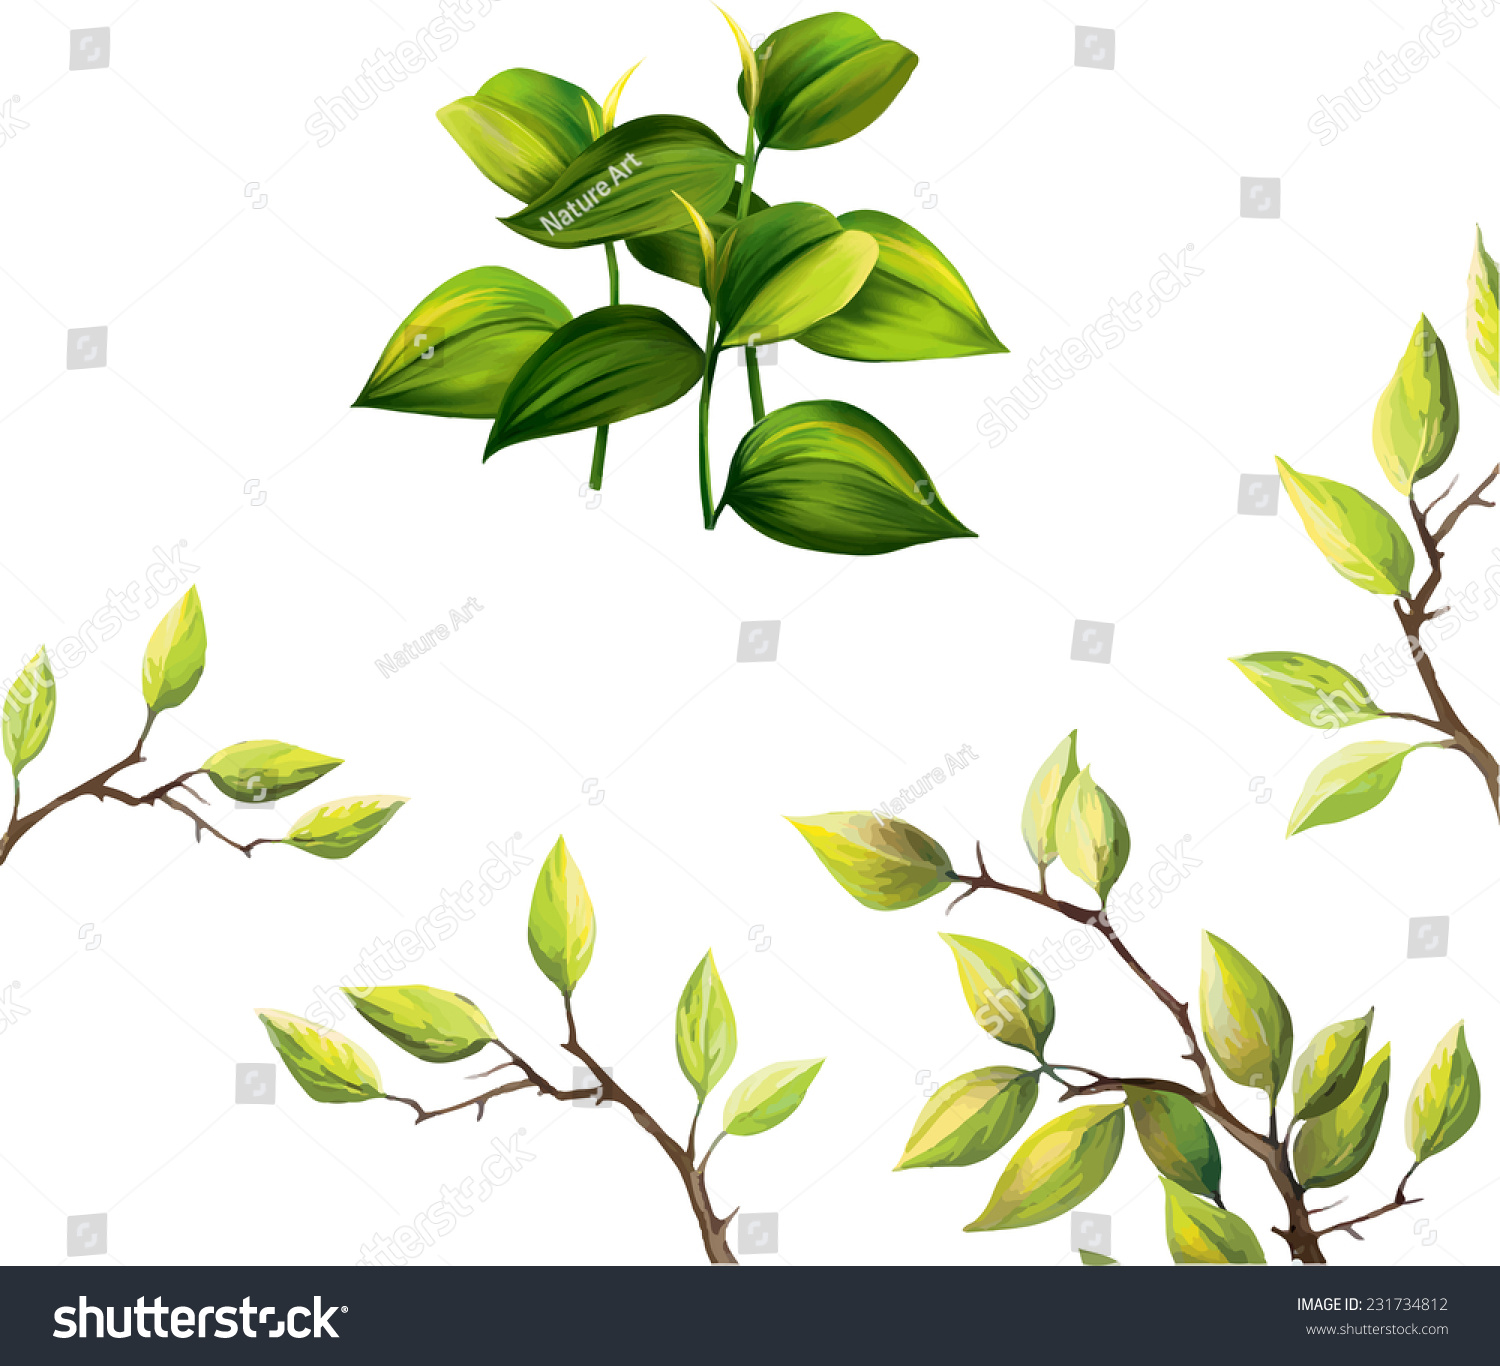 Vector Illustration Green Tropical Leaves Young Stock Vector ...